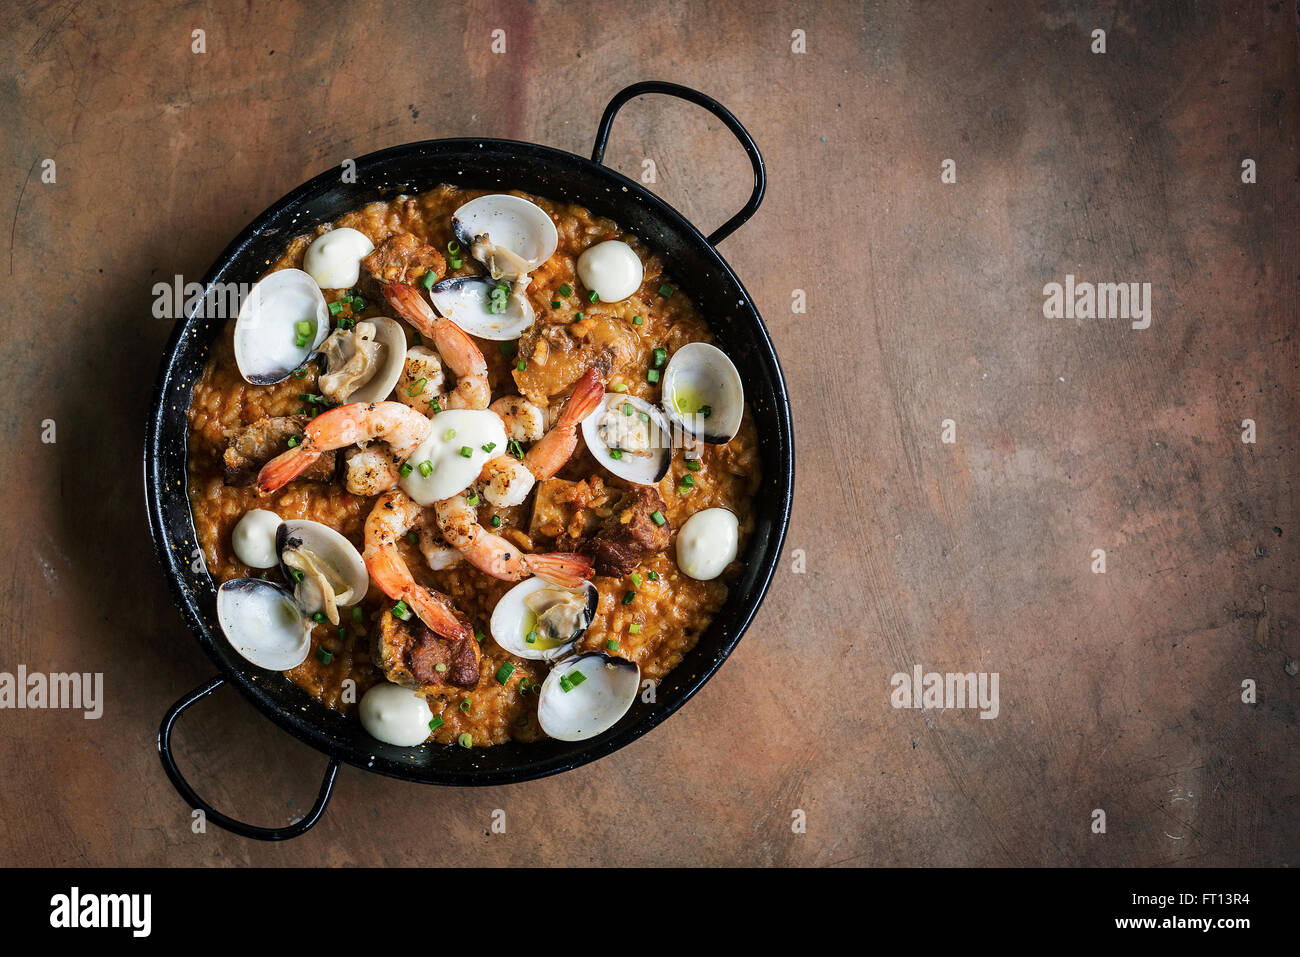 seafood and rice paella traditional famous spanish food Stock Photo